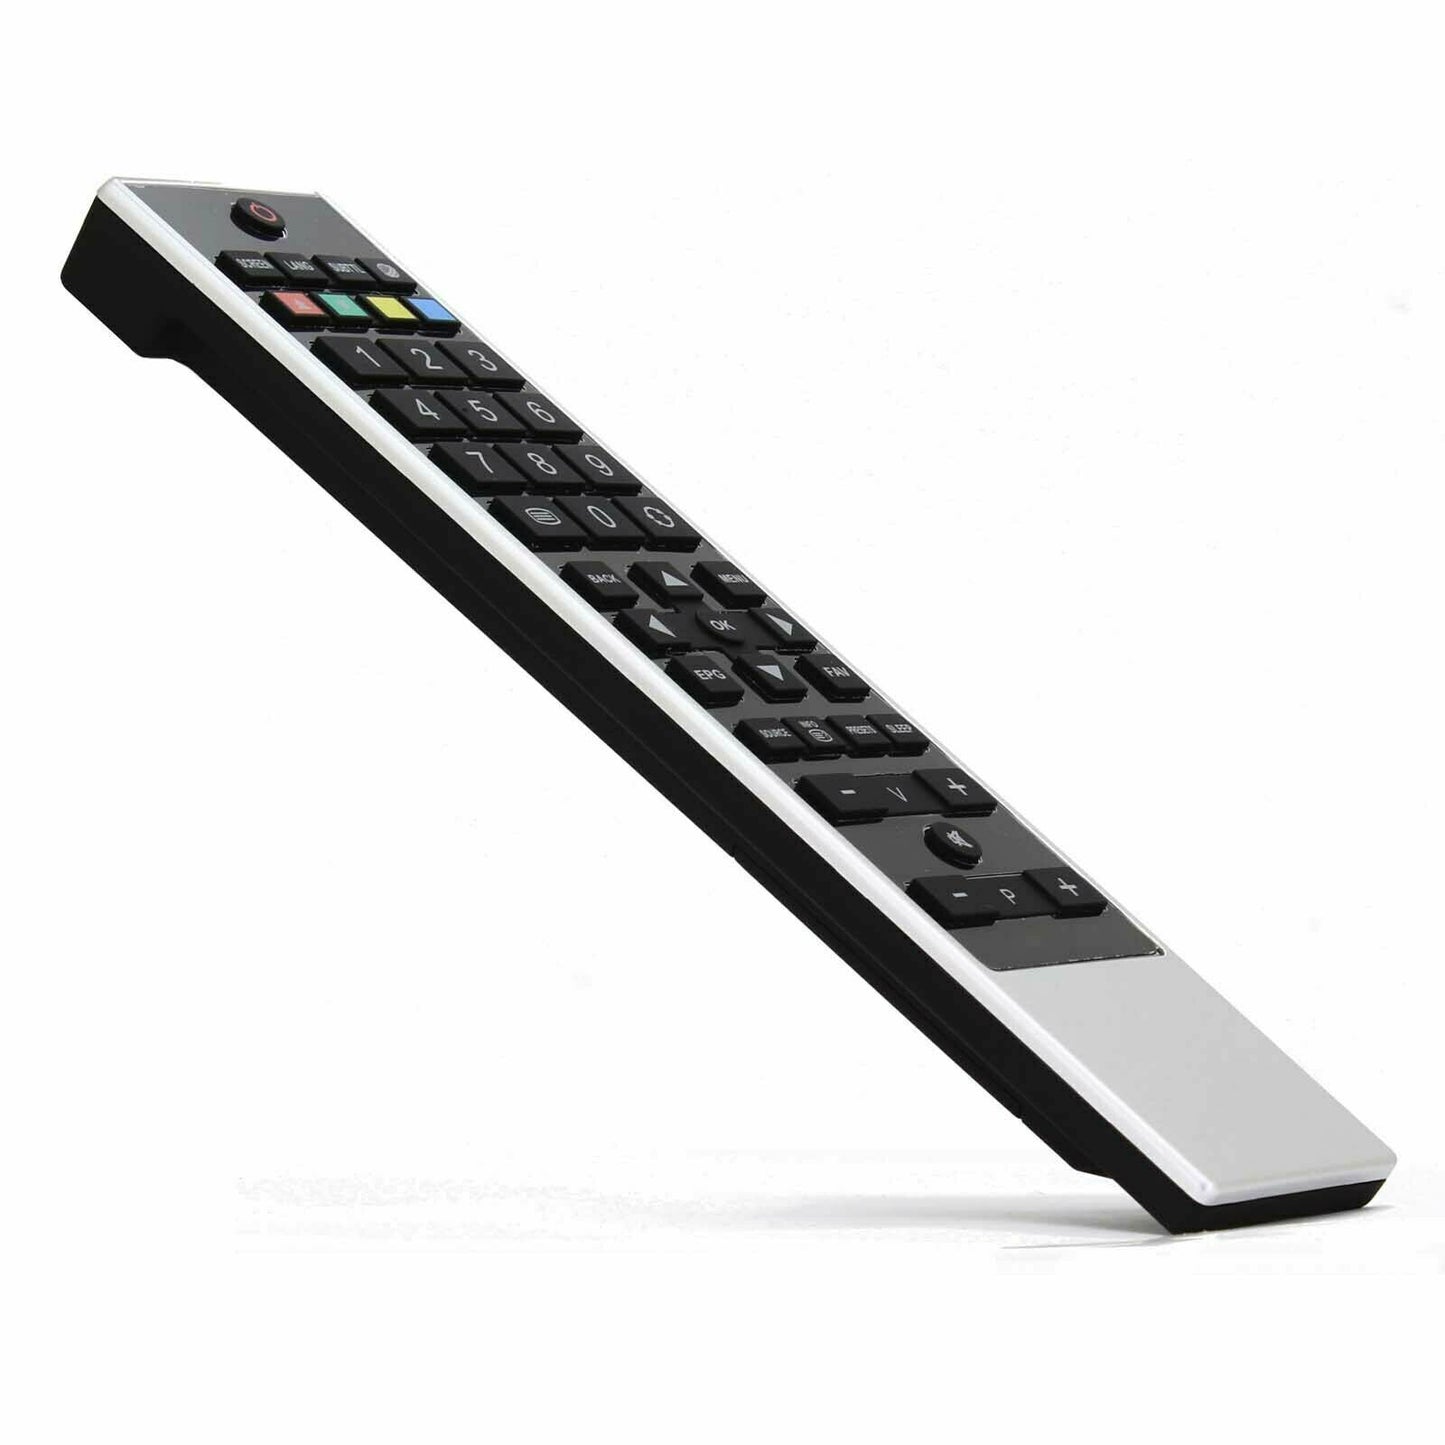 Replacement Remote Control for Toshiba Tv 22KV500B